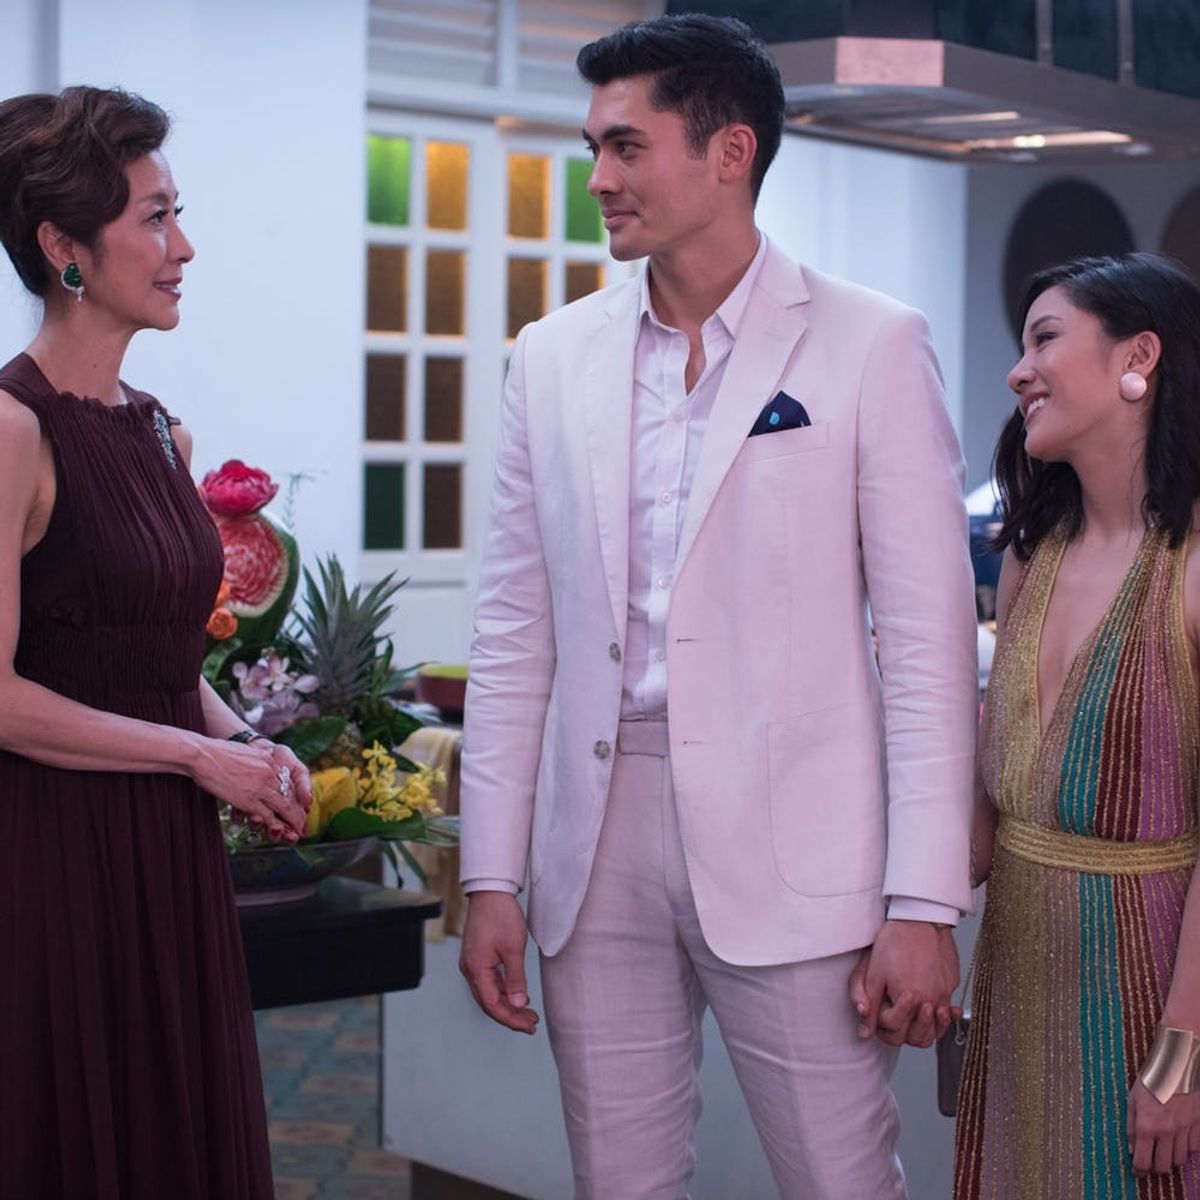 The ‘Crazy Rich Asians’ Trailer Hints at Some Big Changes from the Book Series